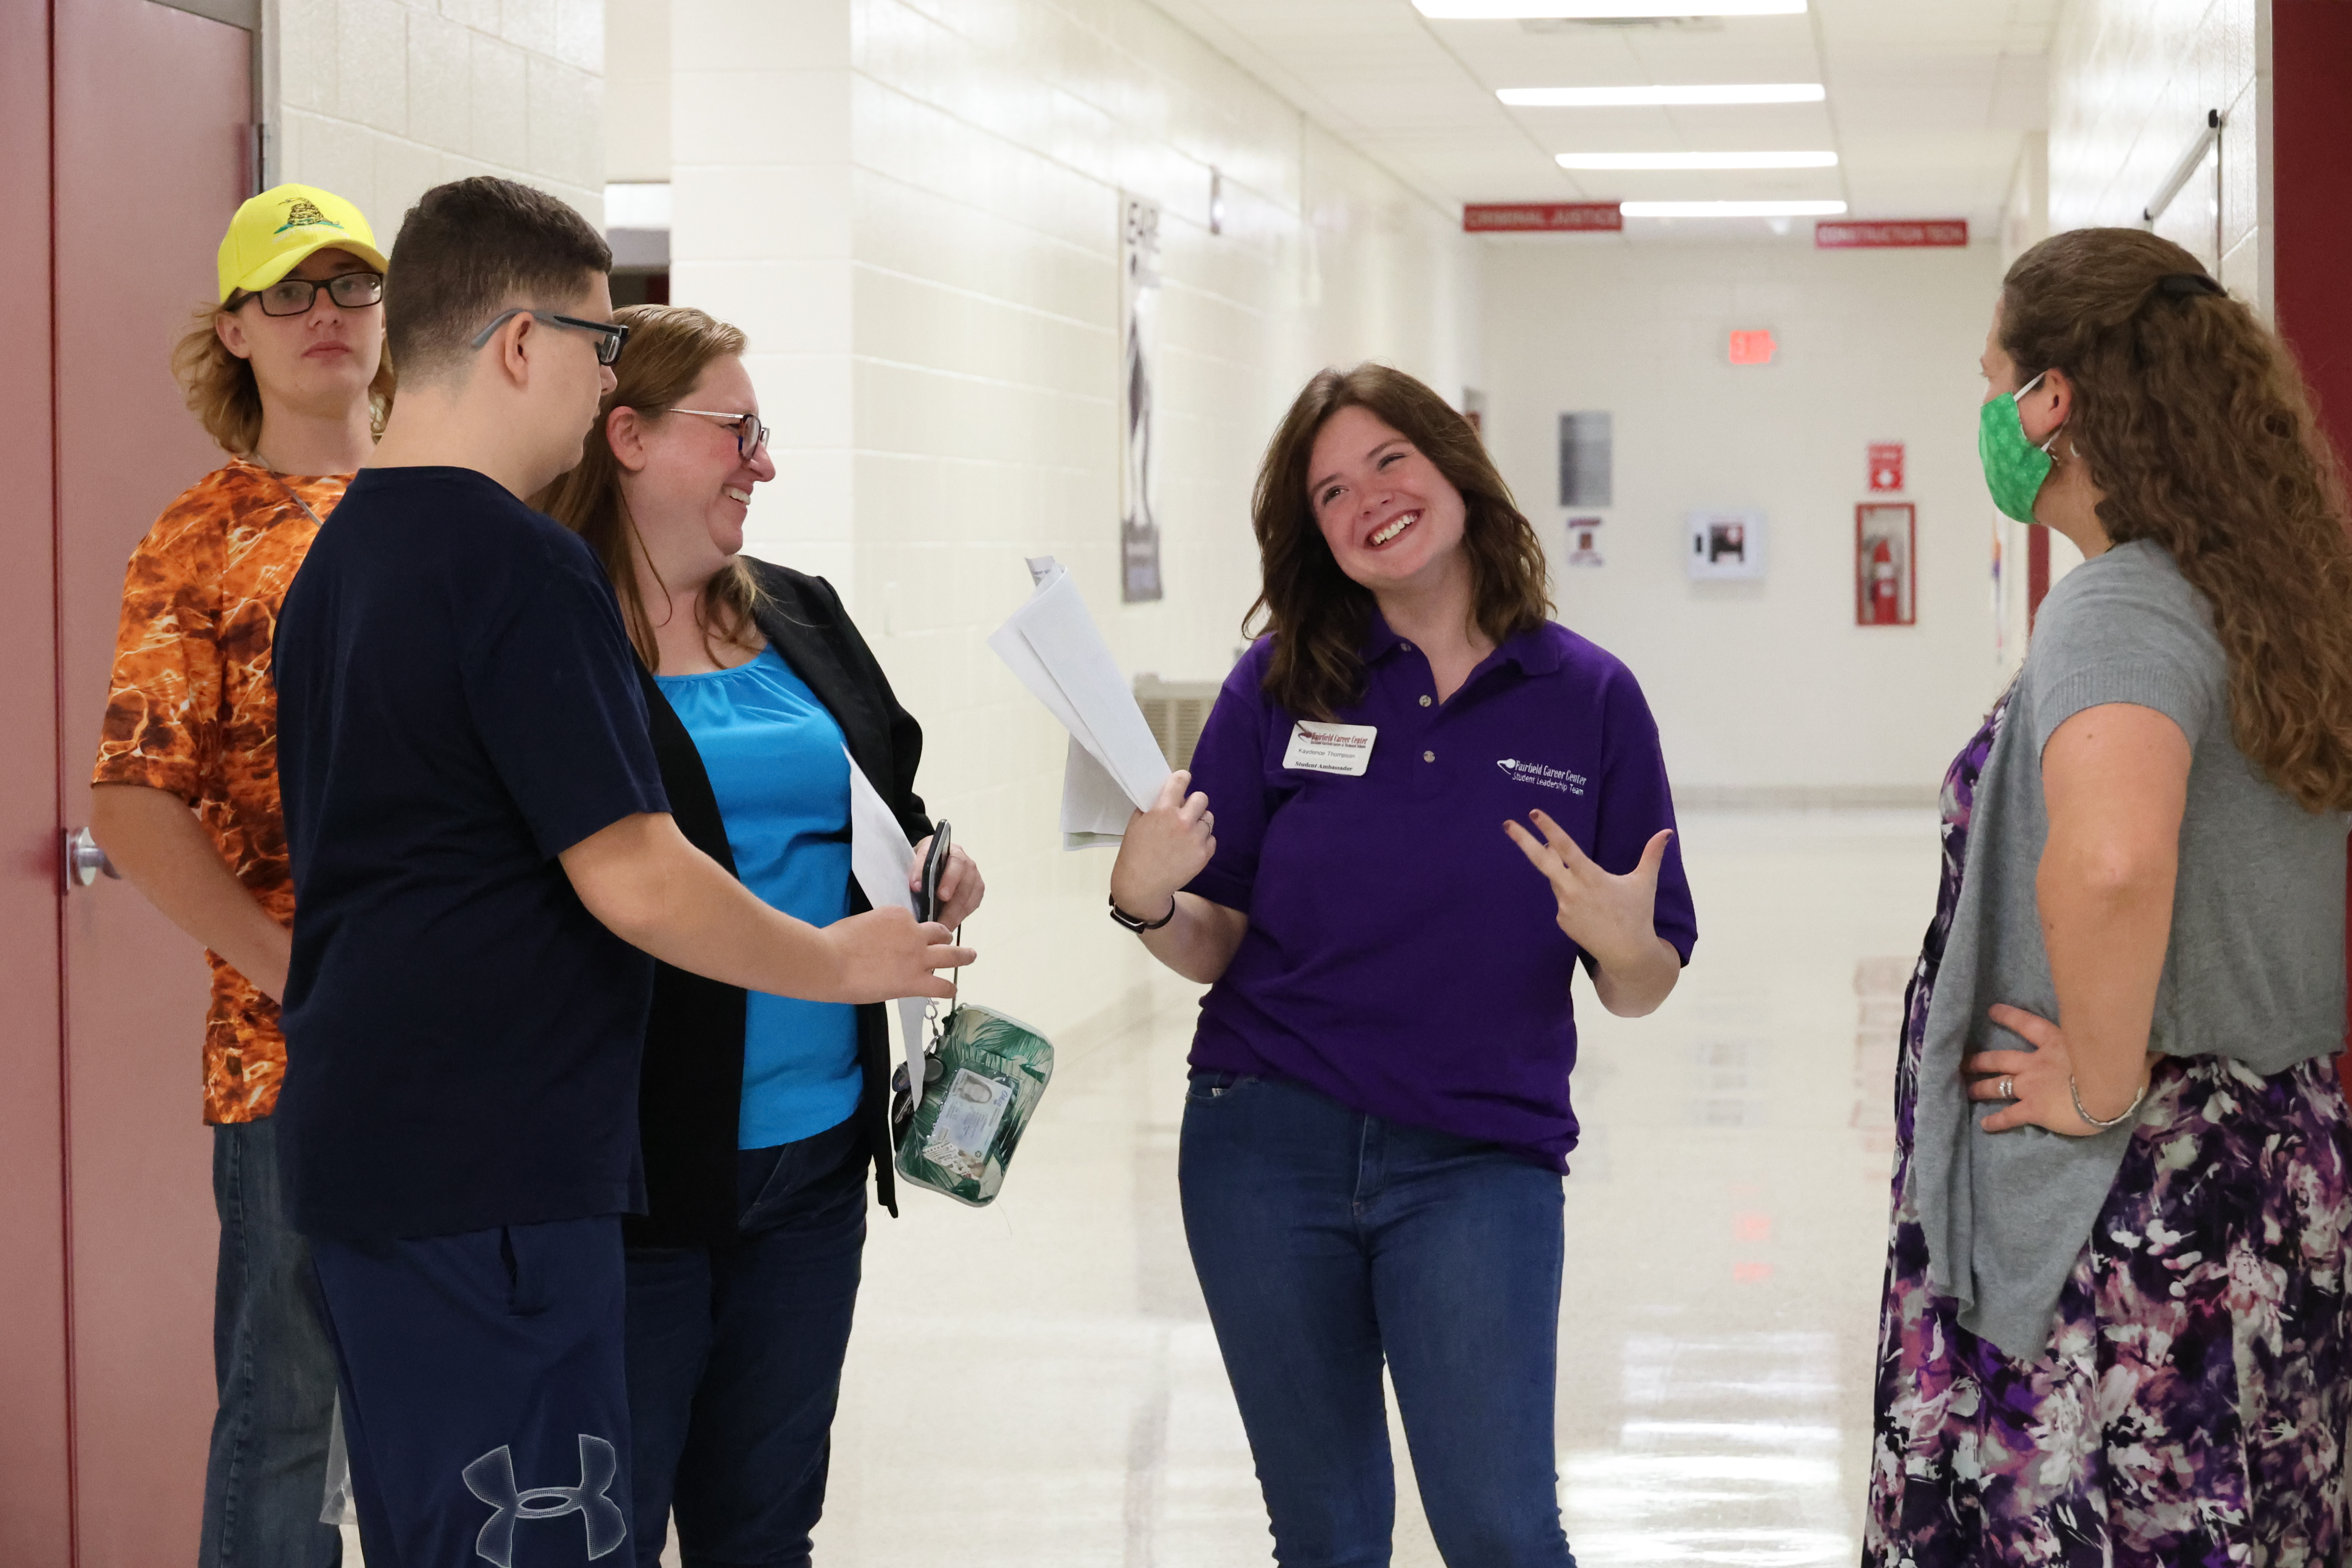 A female student jokes and smiles with a new family in the FCC hallway